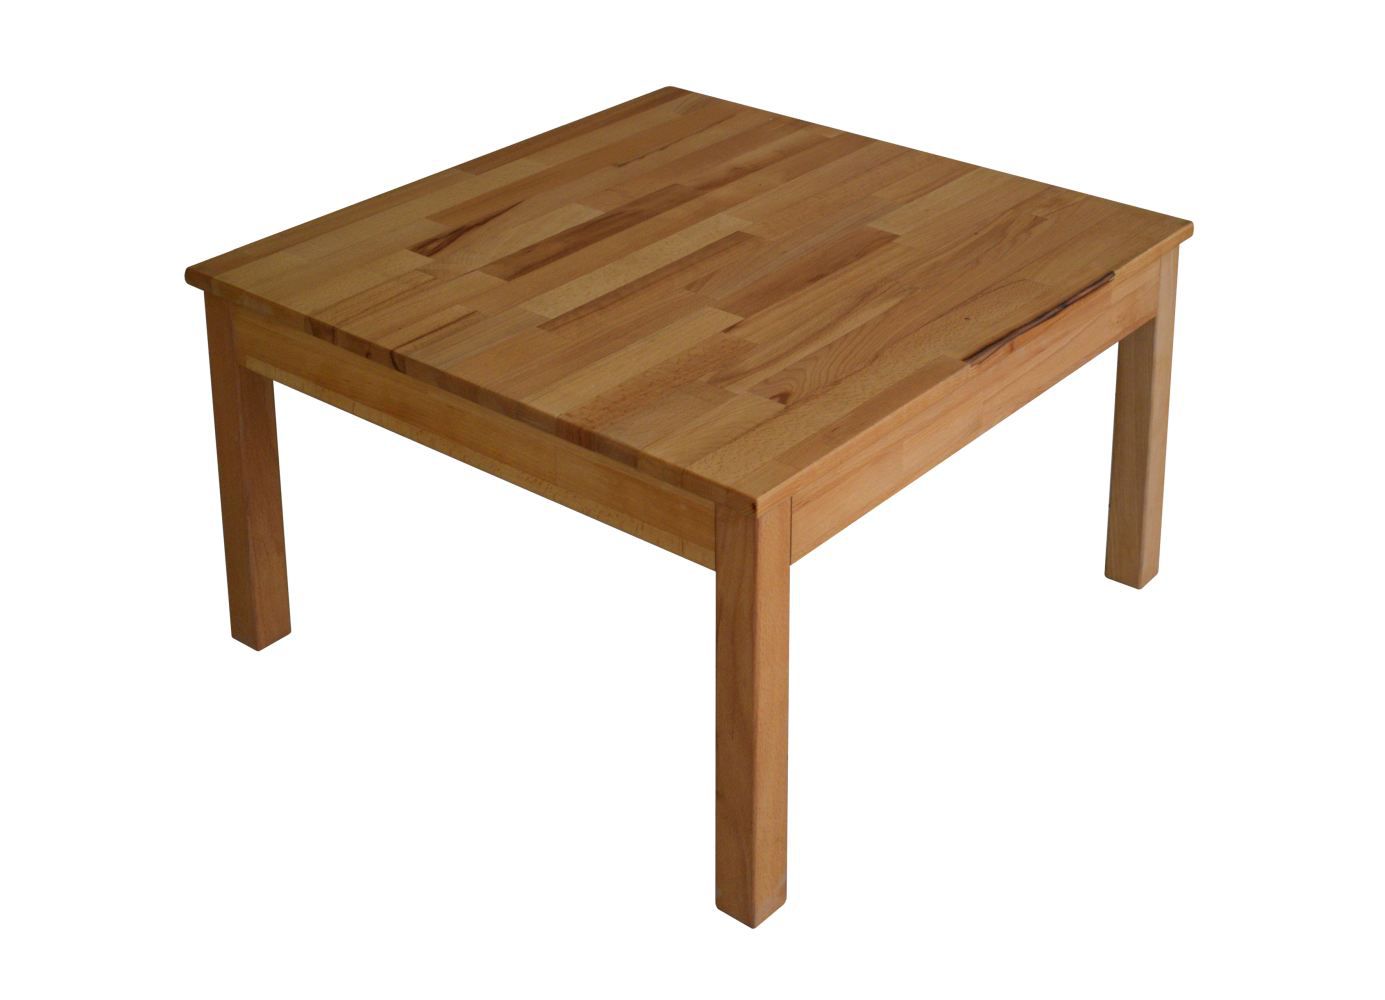 Coffee table Wooden Nature 204 solid beech Natural oiled - Measurements: 70 x 70 x 45 cm (W x D x H)